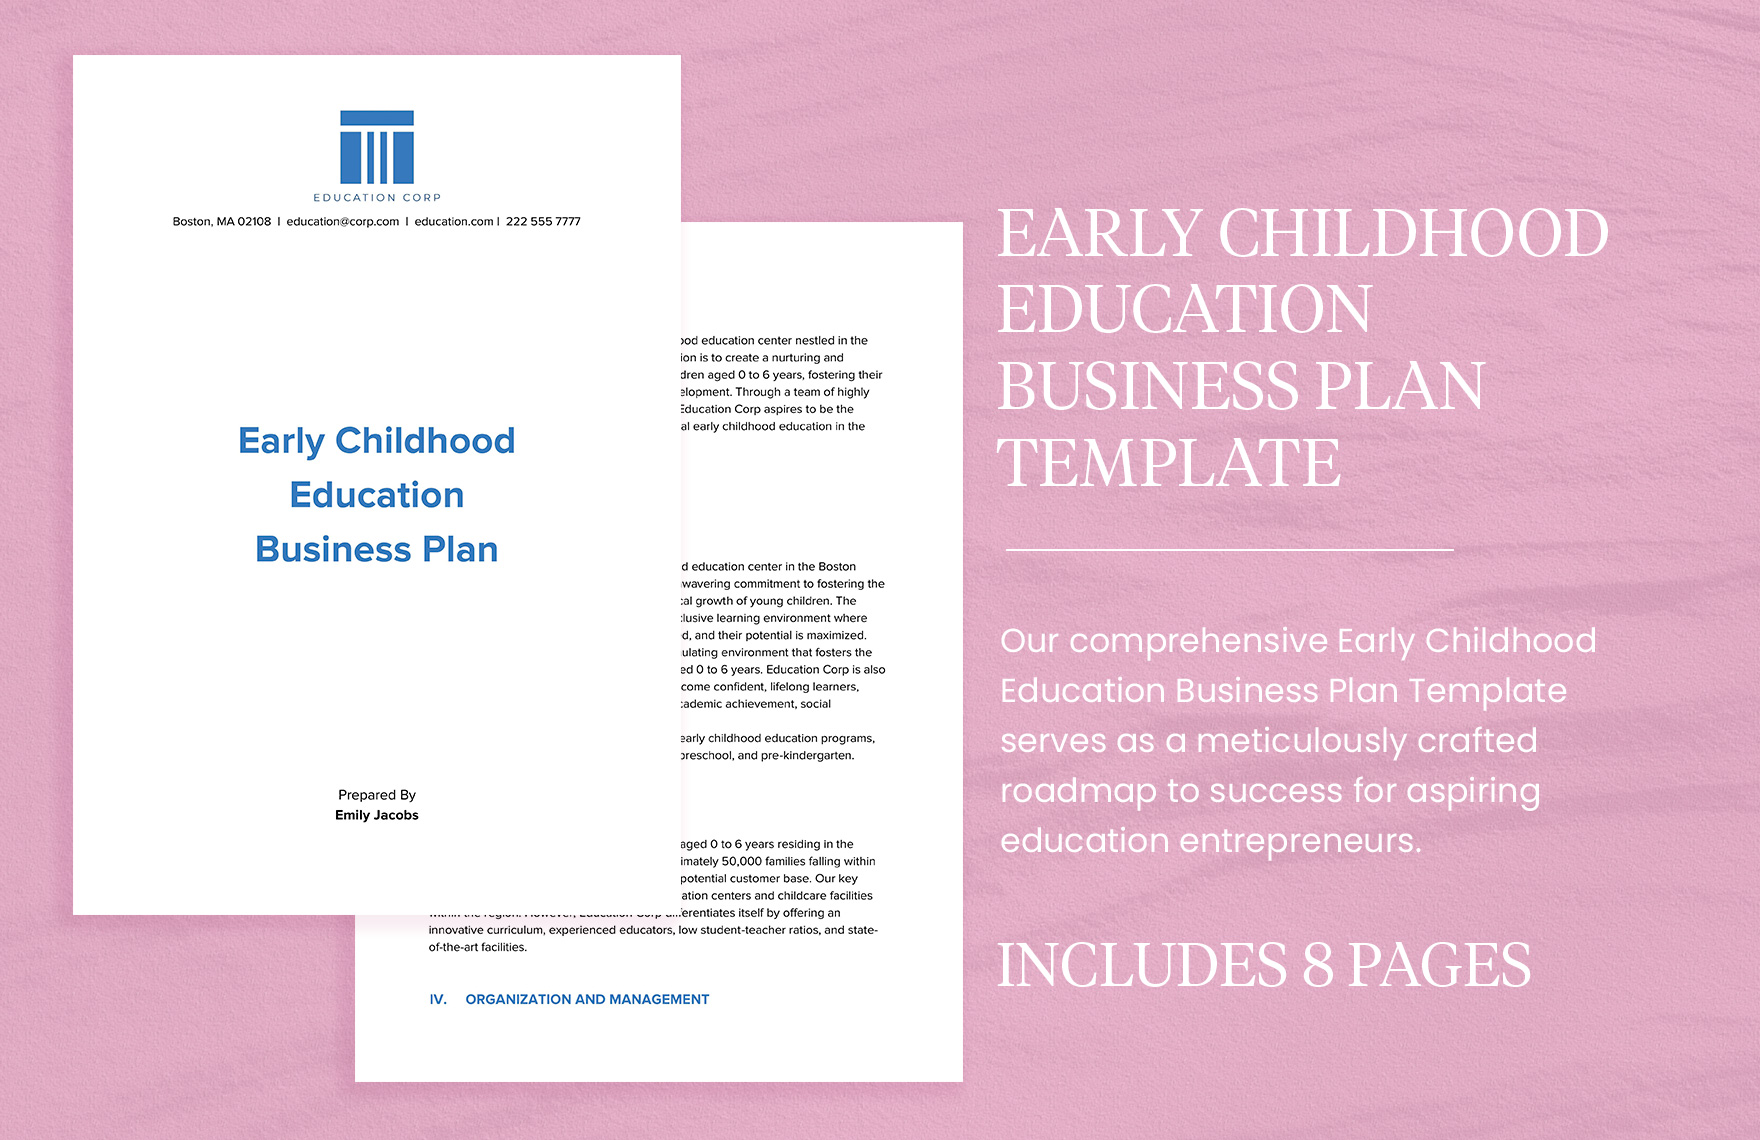 Early Childhood Education Business Plan Template in Word, Google Docs, PDF